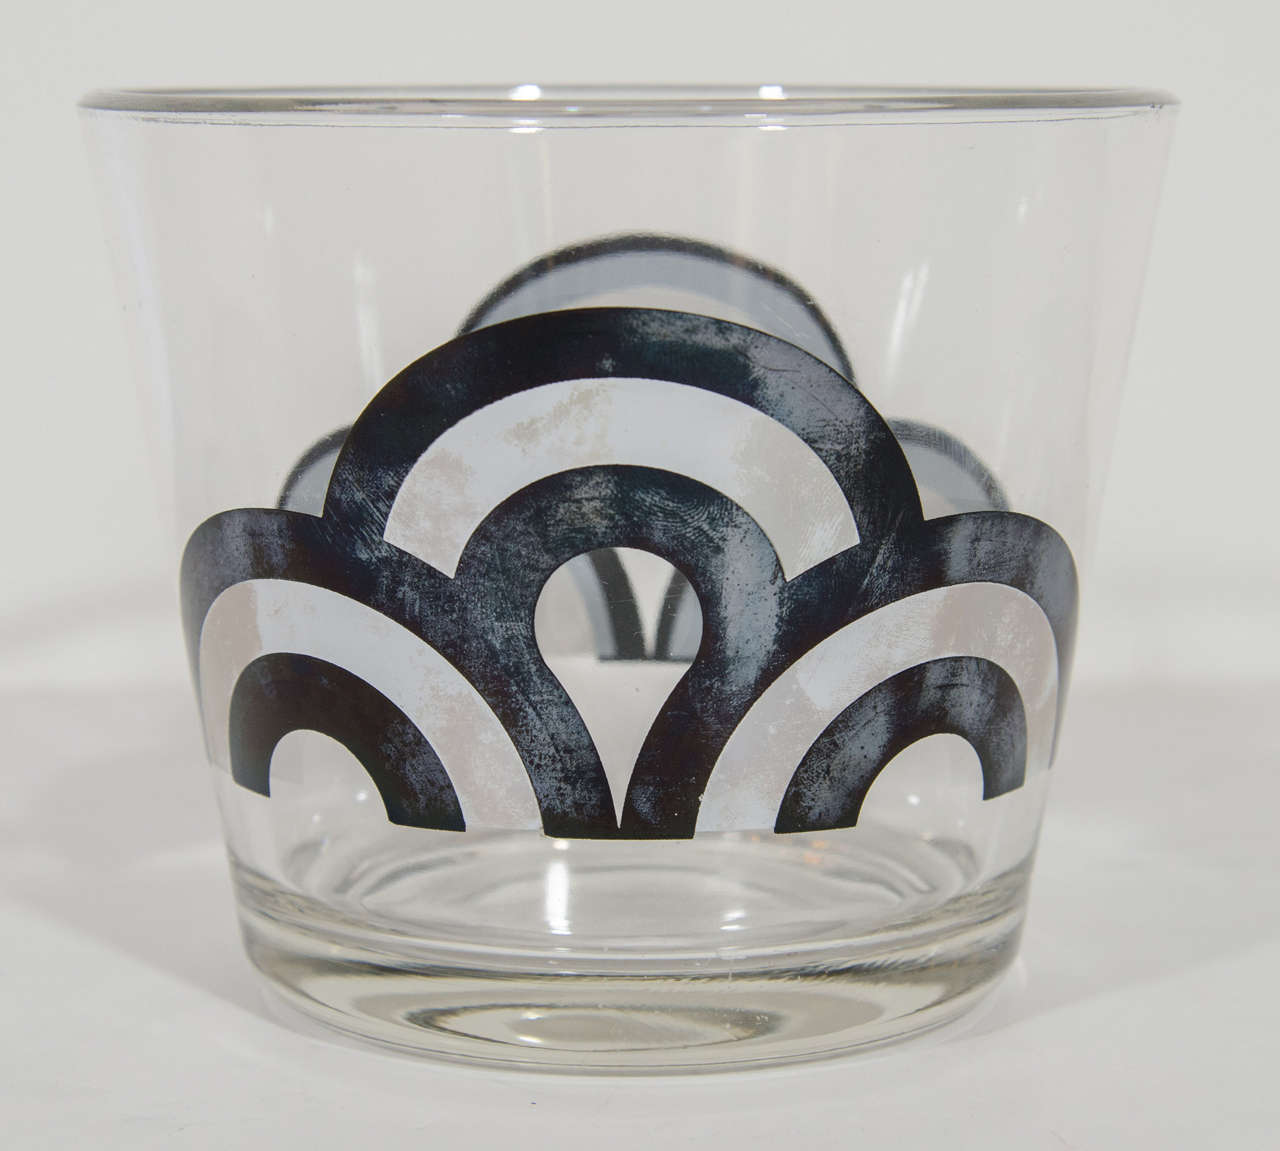 Mid-Century Modern handblown glass wine cooler or ice bucket with stylized geometric pattern designs in black and white. Smaller scale and a great addition to any period or contemporary barware collection.